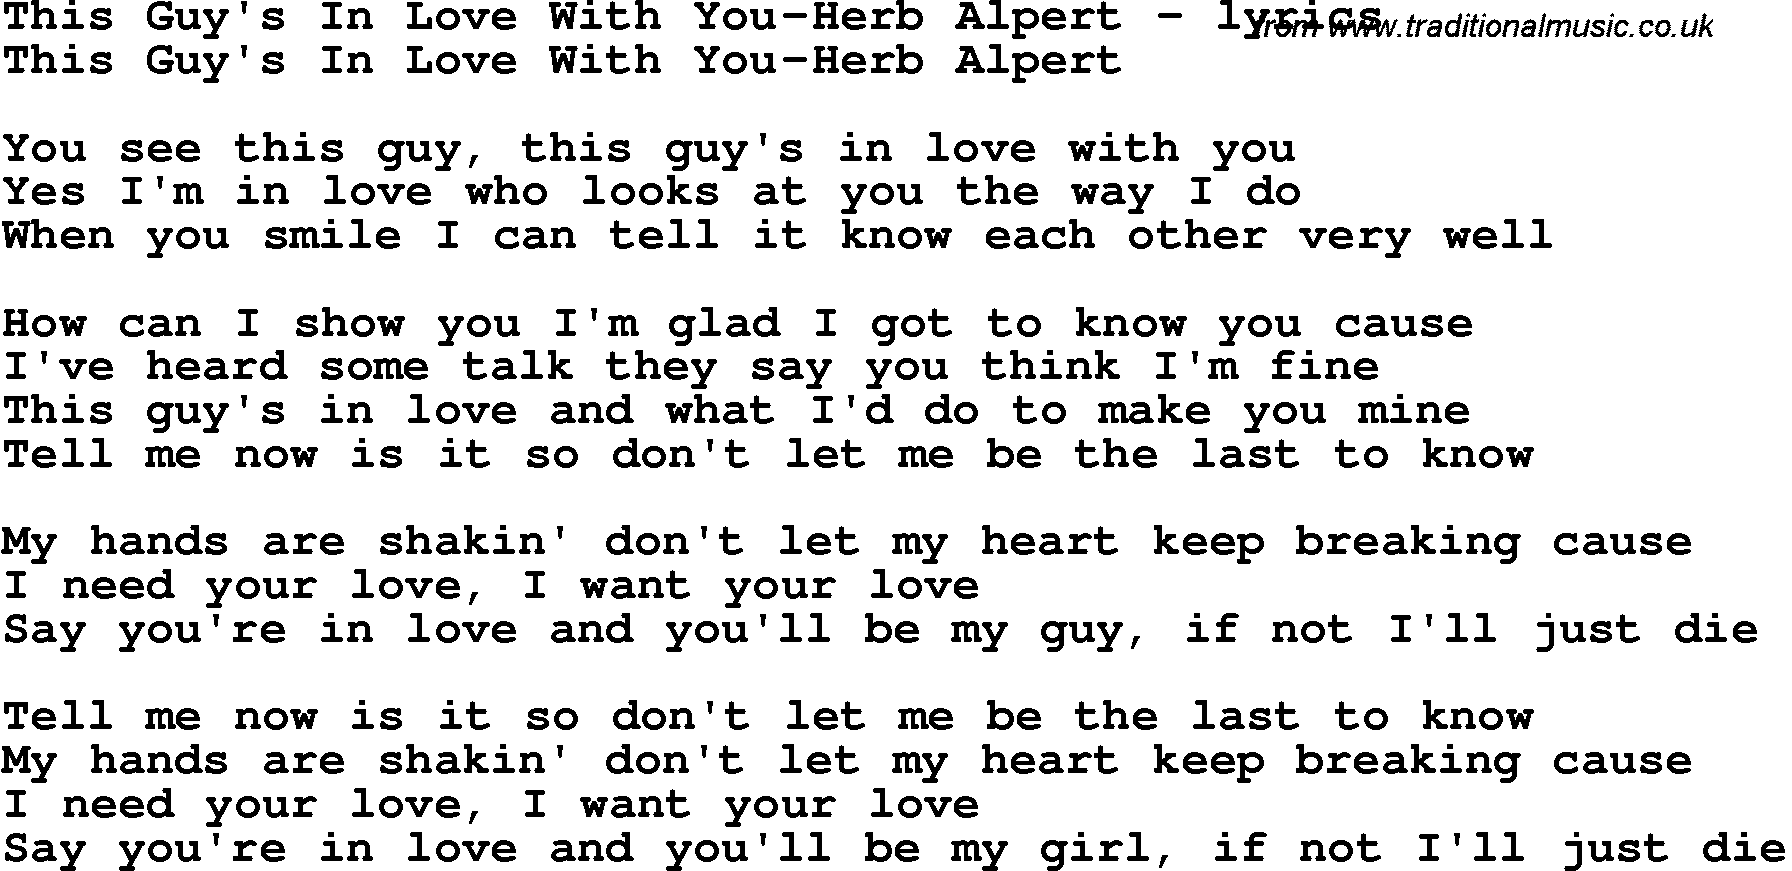 Love Song Lyrics for: This Guy's In Love With You-Herb Alpert